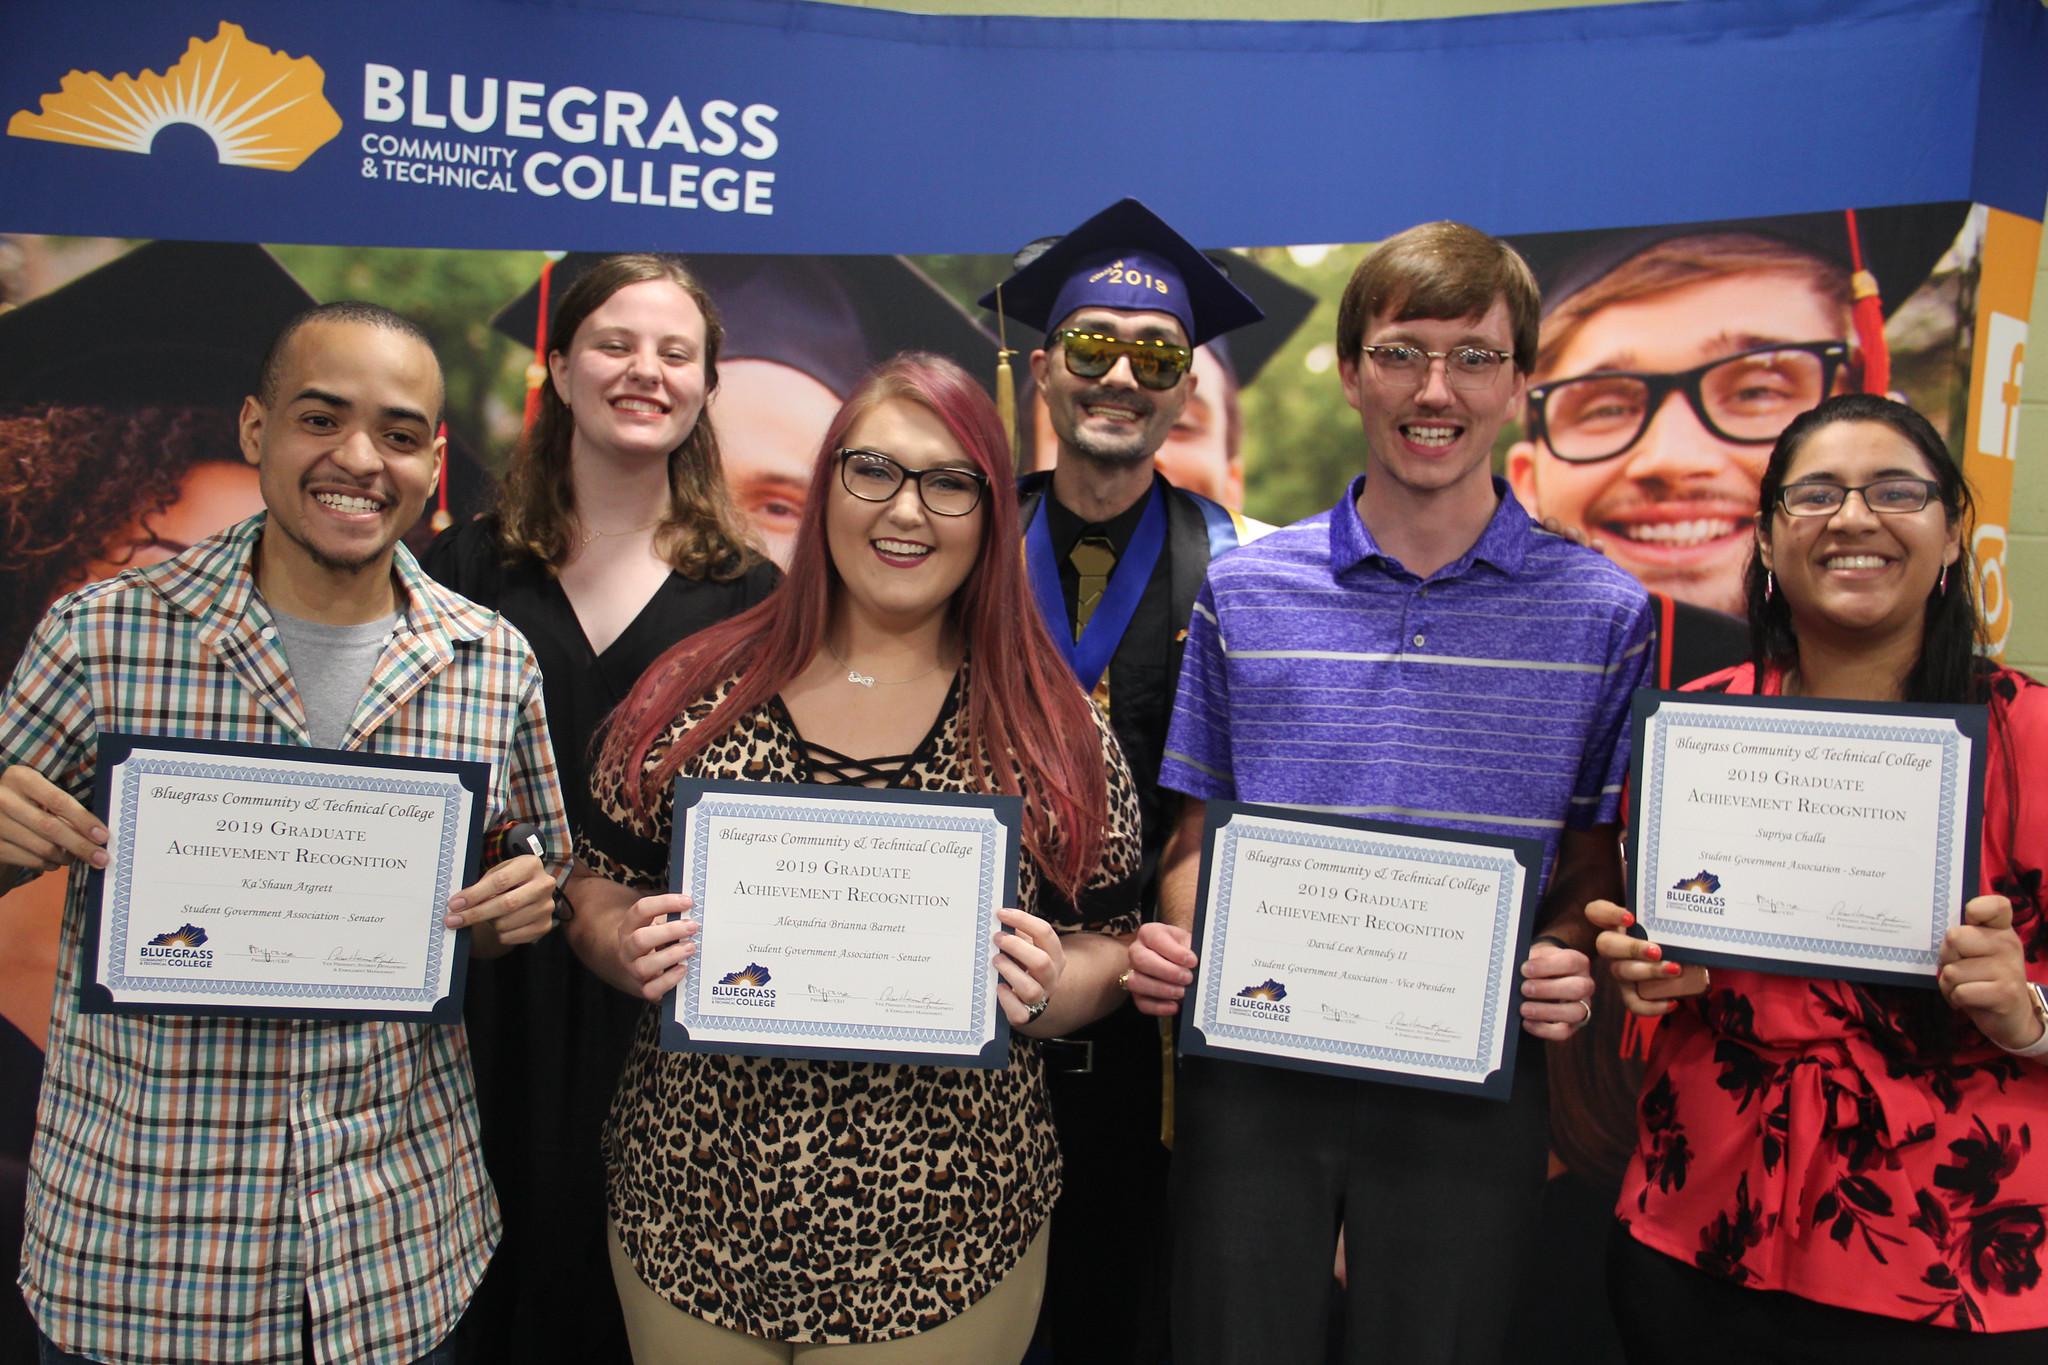 students with their Graduate Achievement Recognition awards